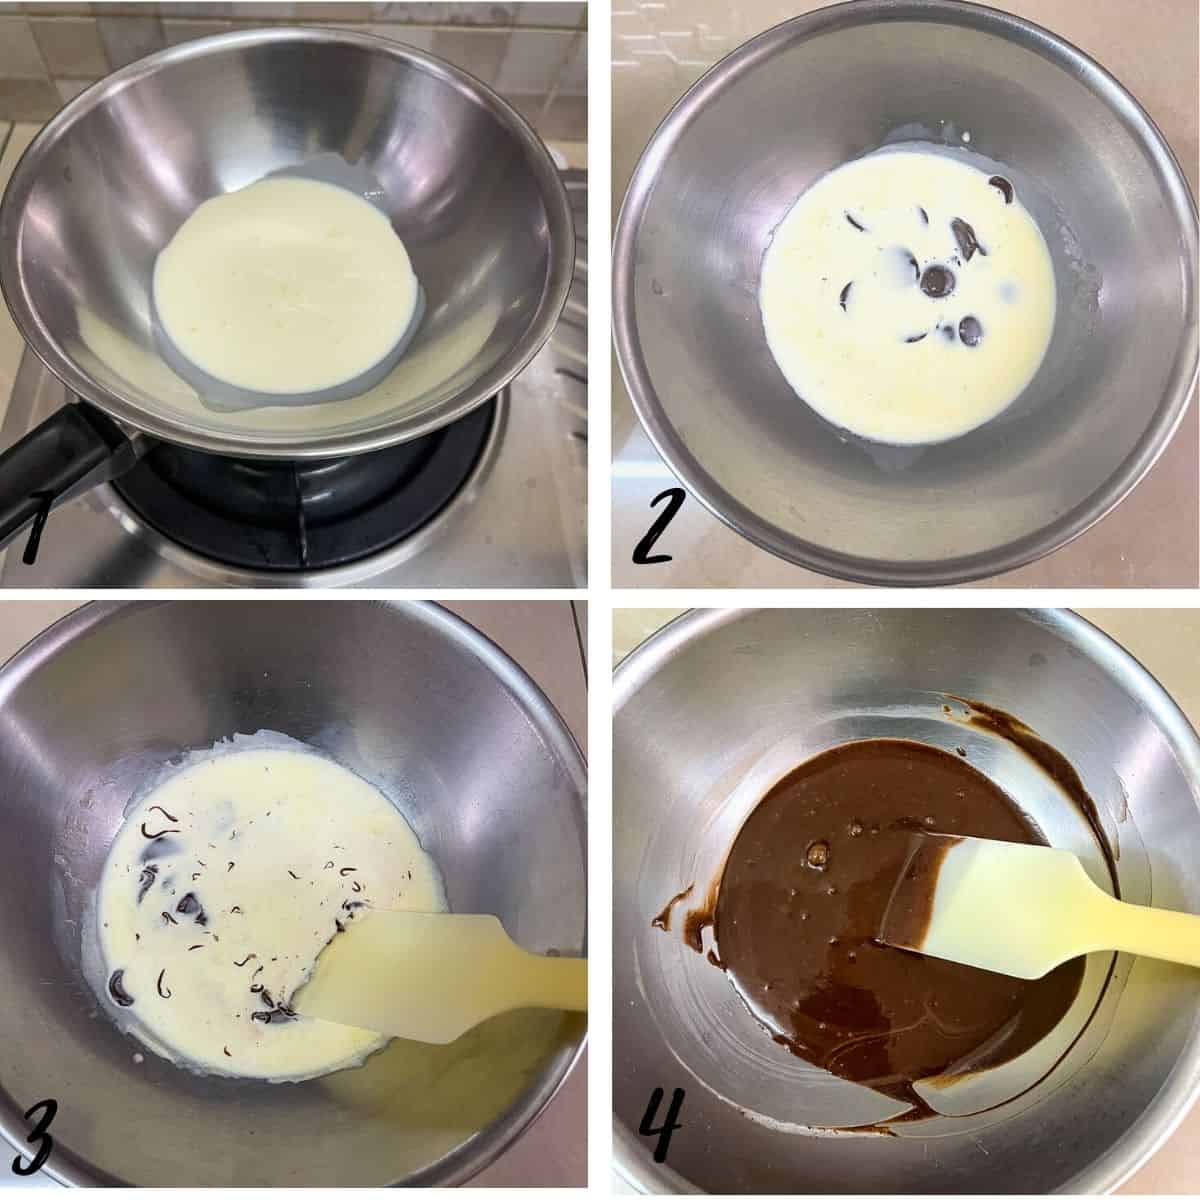 A poster of 4 images showing how to make chocolate ganache topping